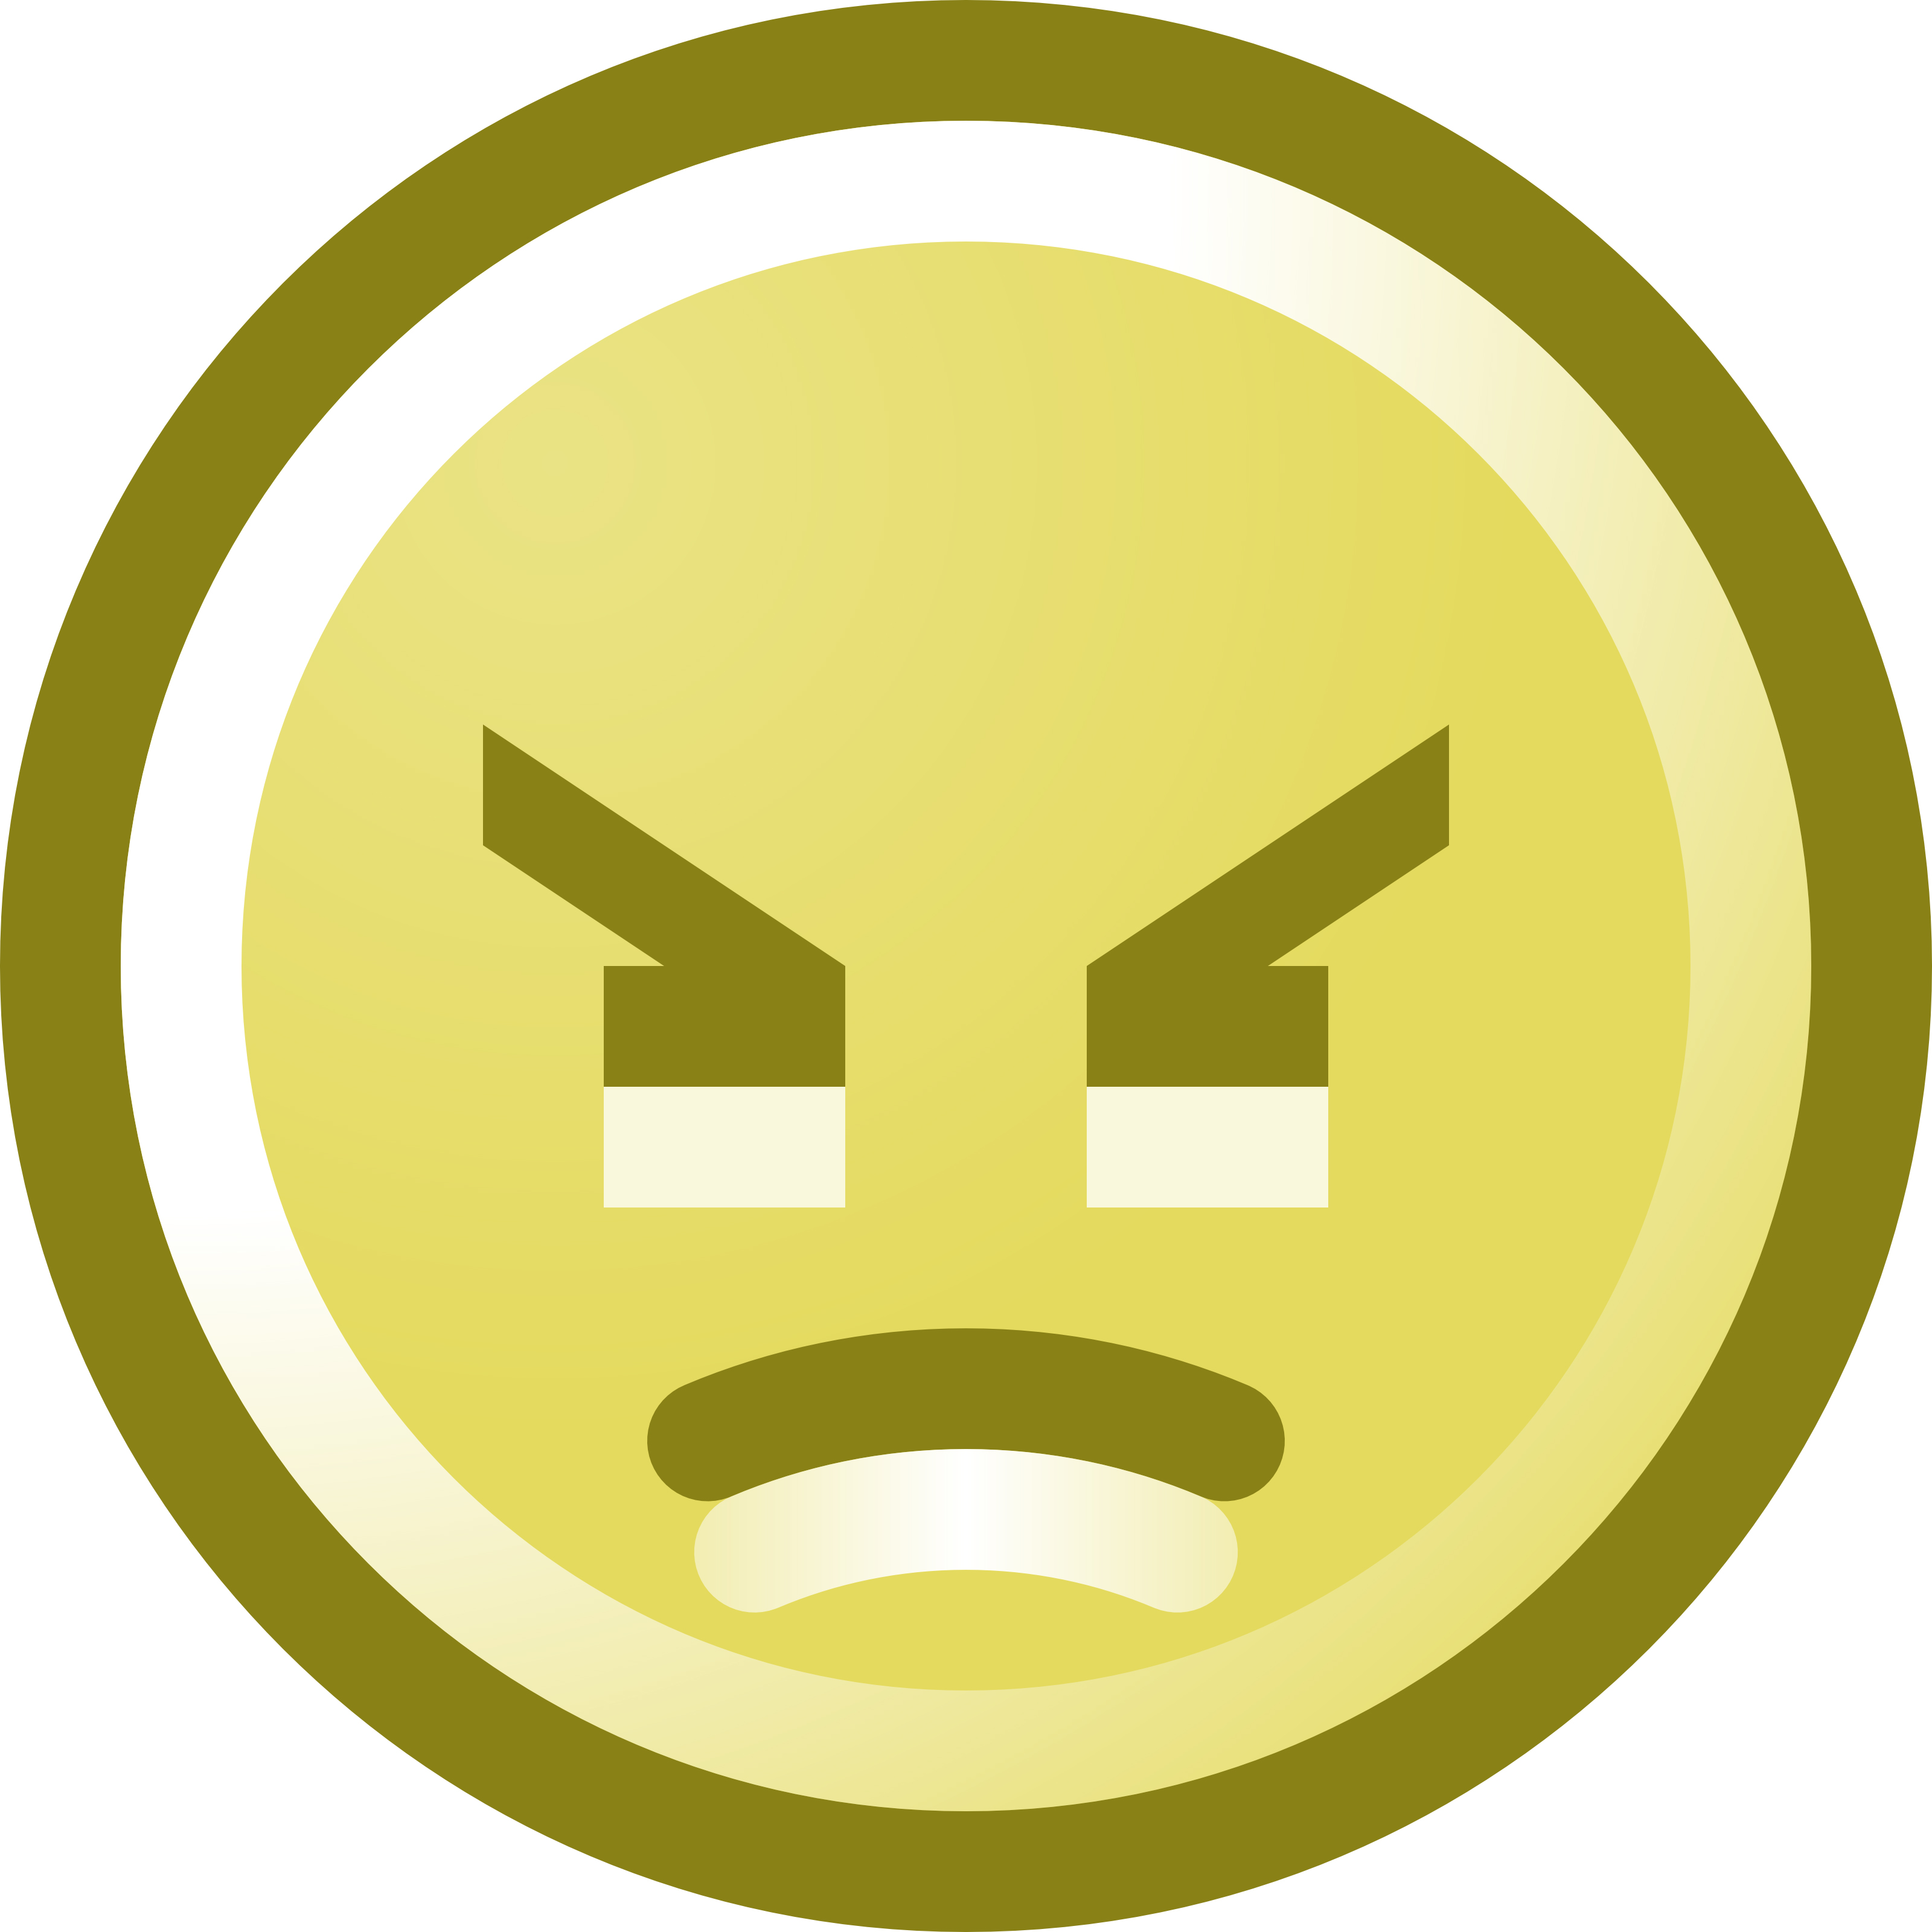 Aggravated Face Clipart